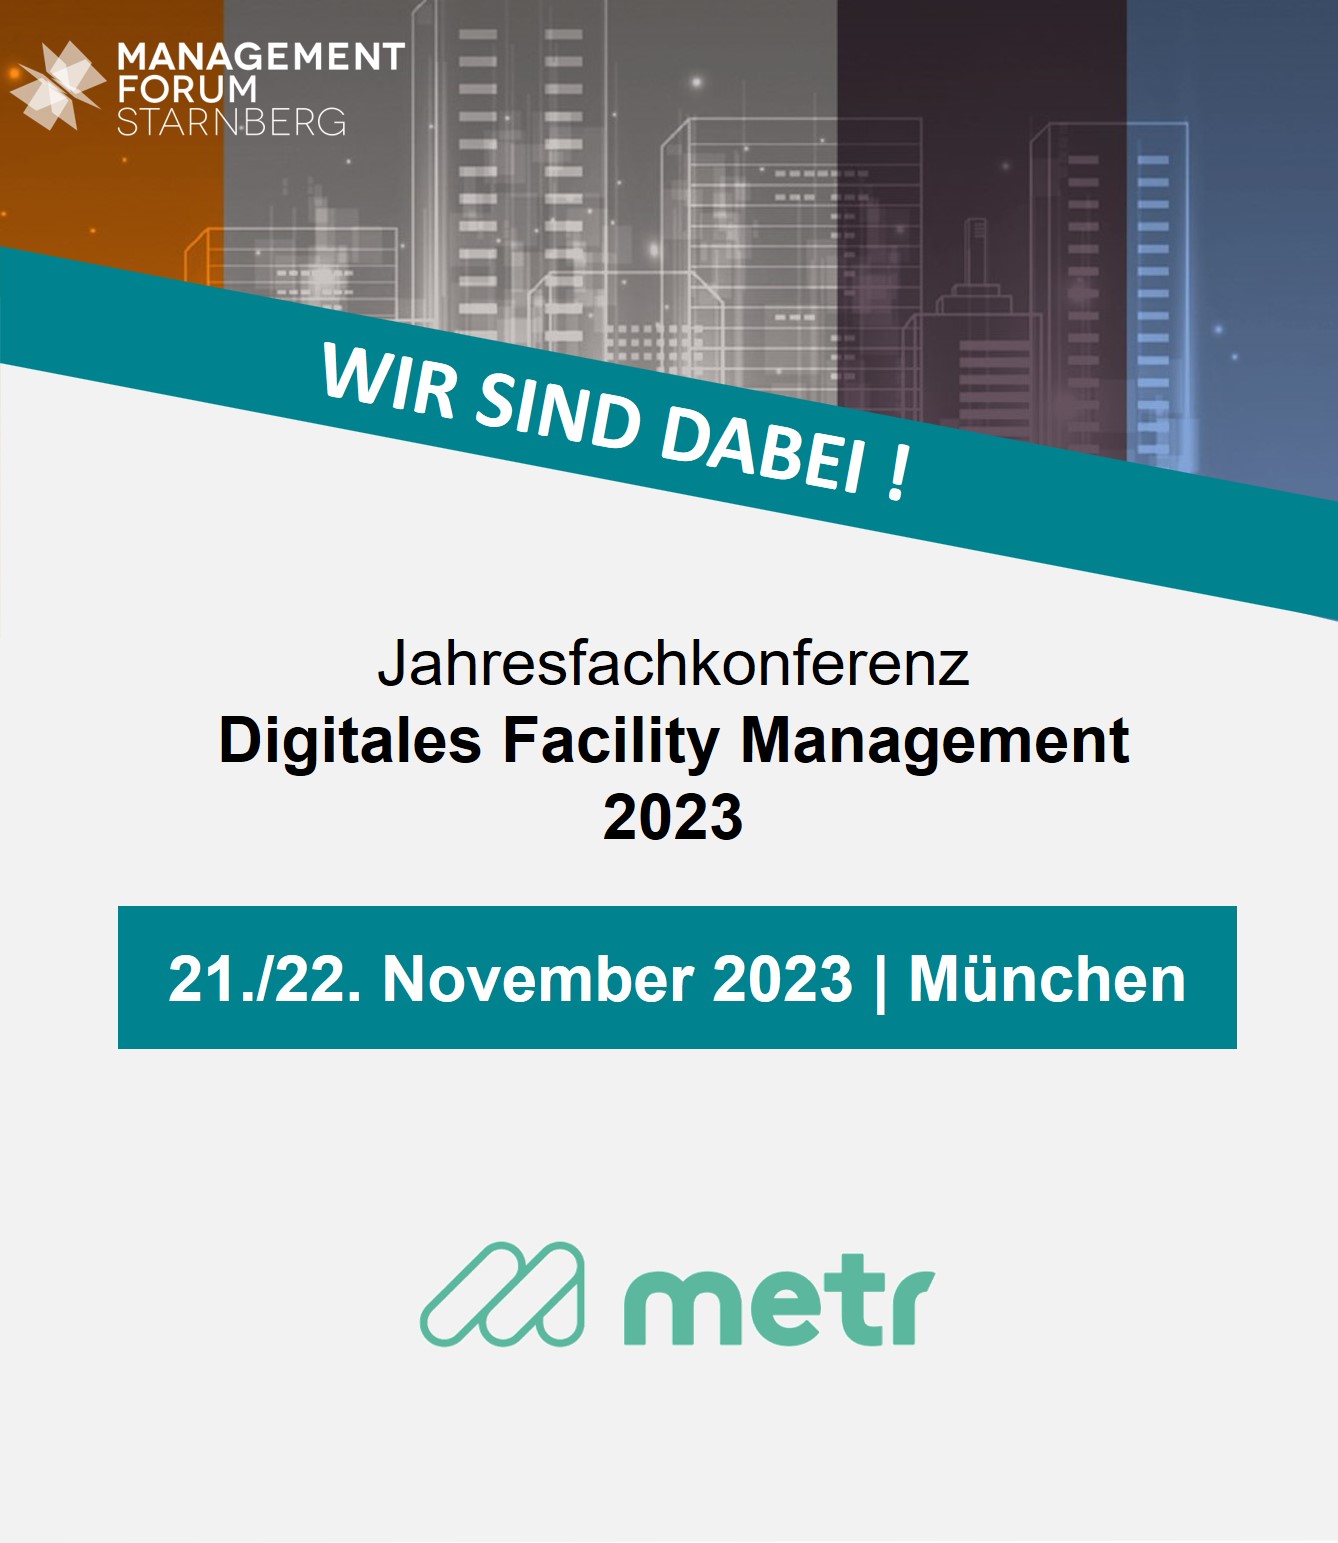 metr bei Digitales Facility Management